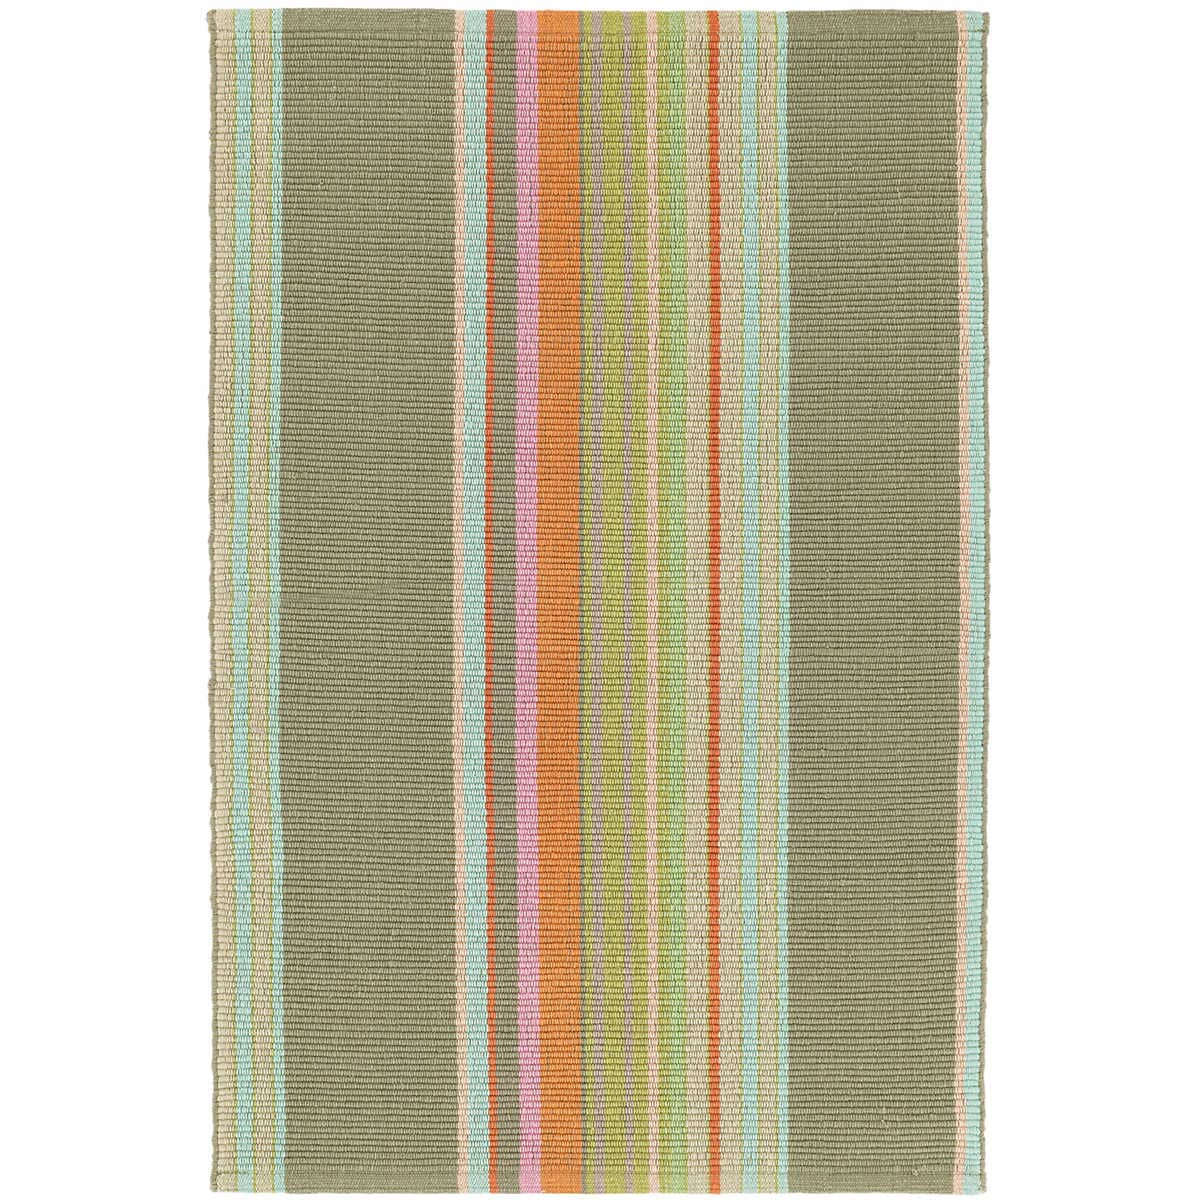 Stone Soup Woven Cotton Rug Rugs 